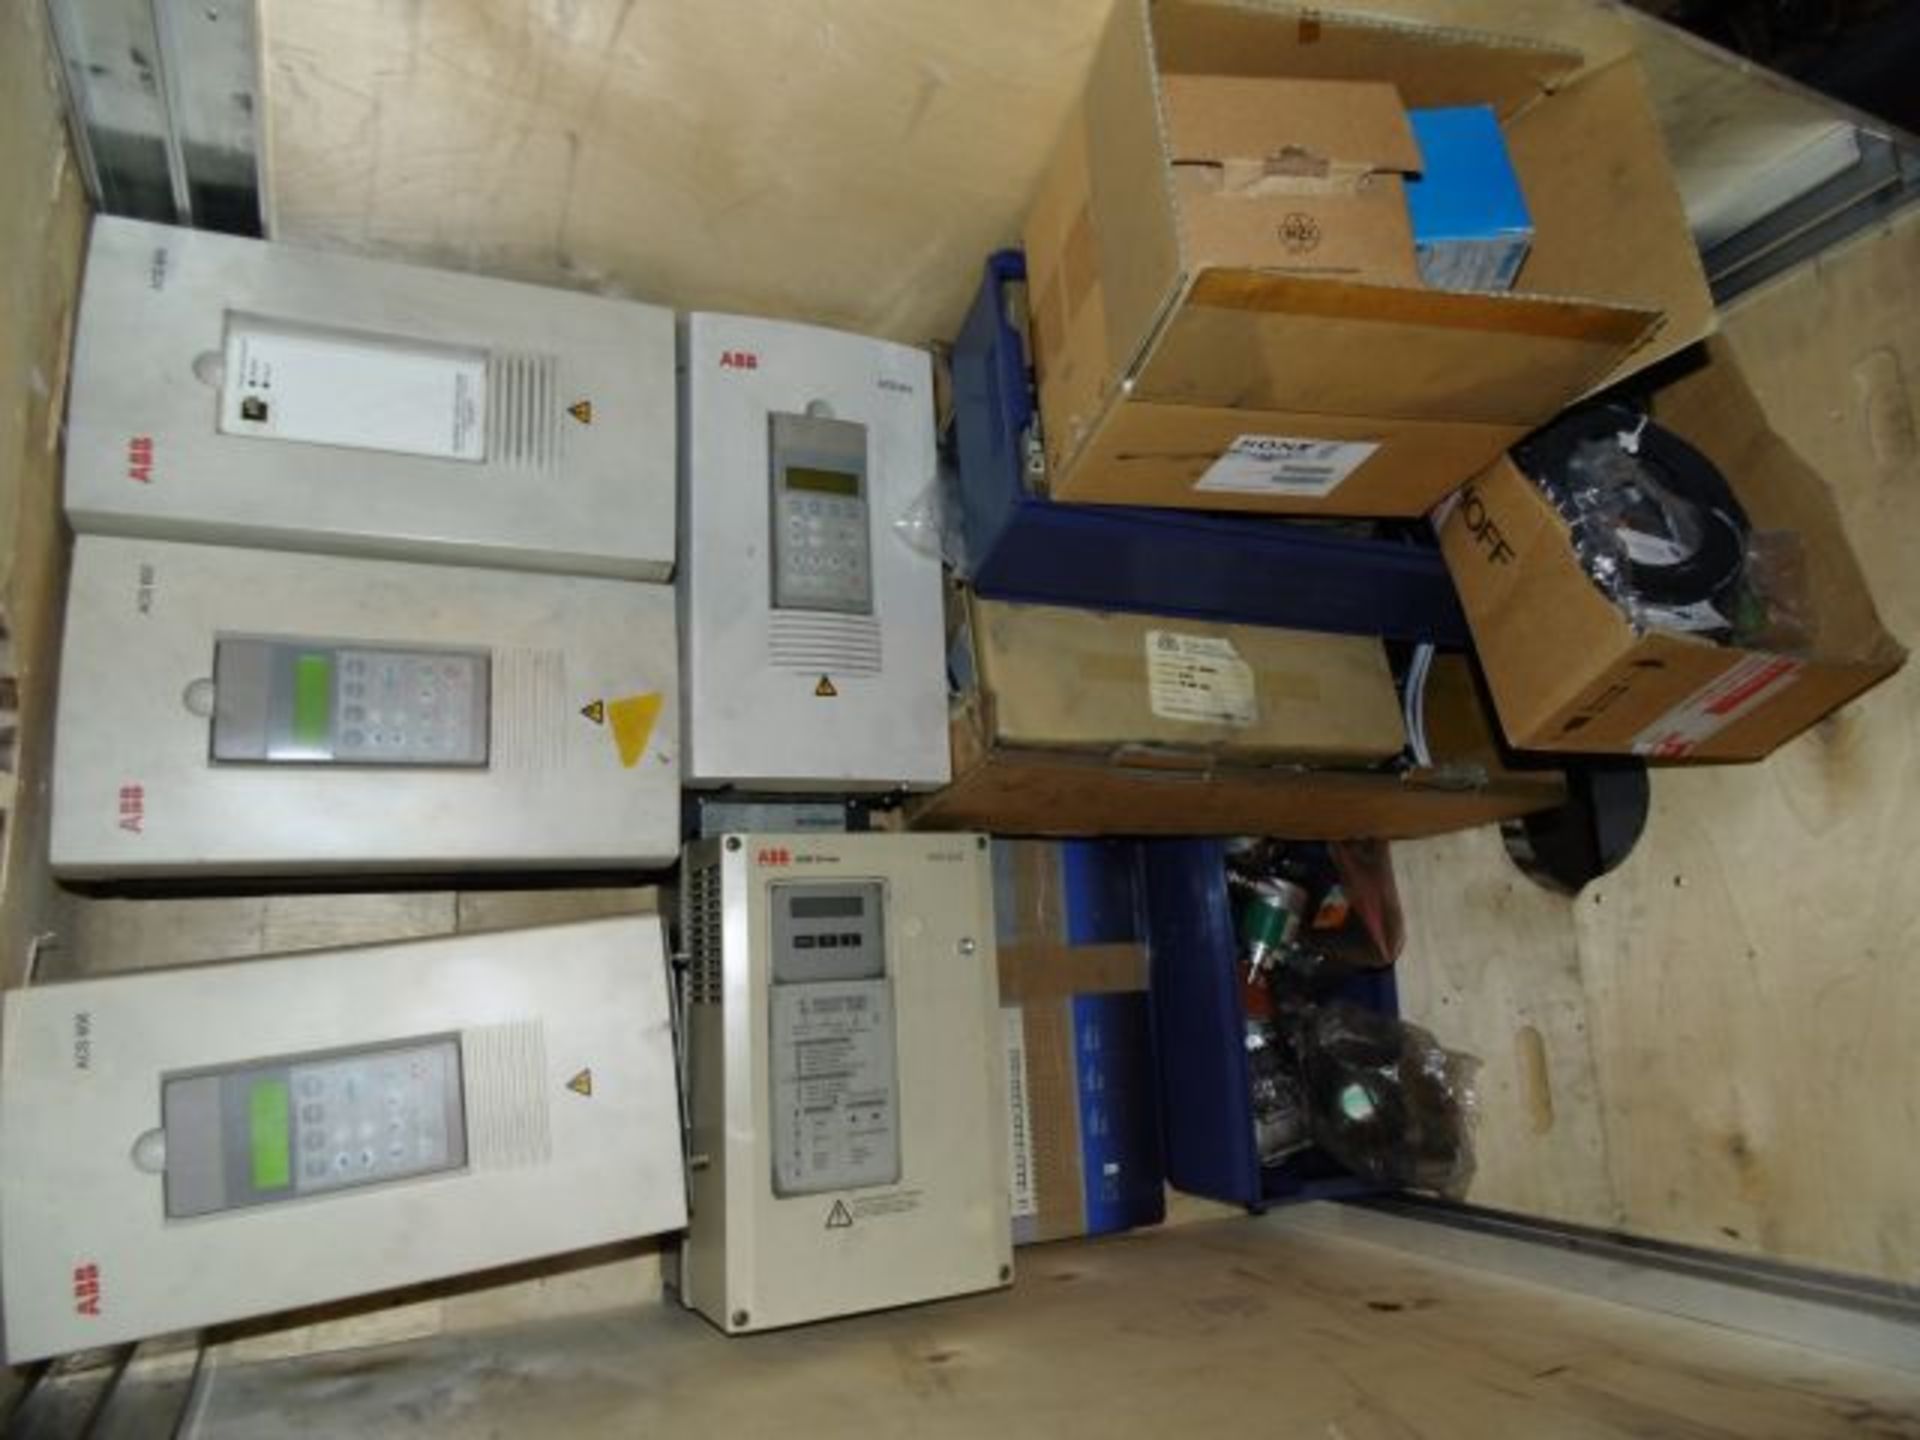 * 4 x ABB ACS 600 Modules, ABB SDS 300 Drive & other Electrical Control Components. Loaded onto